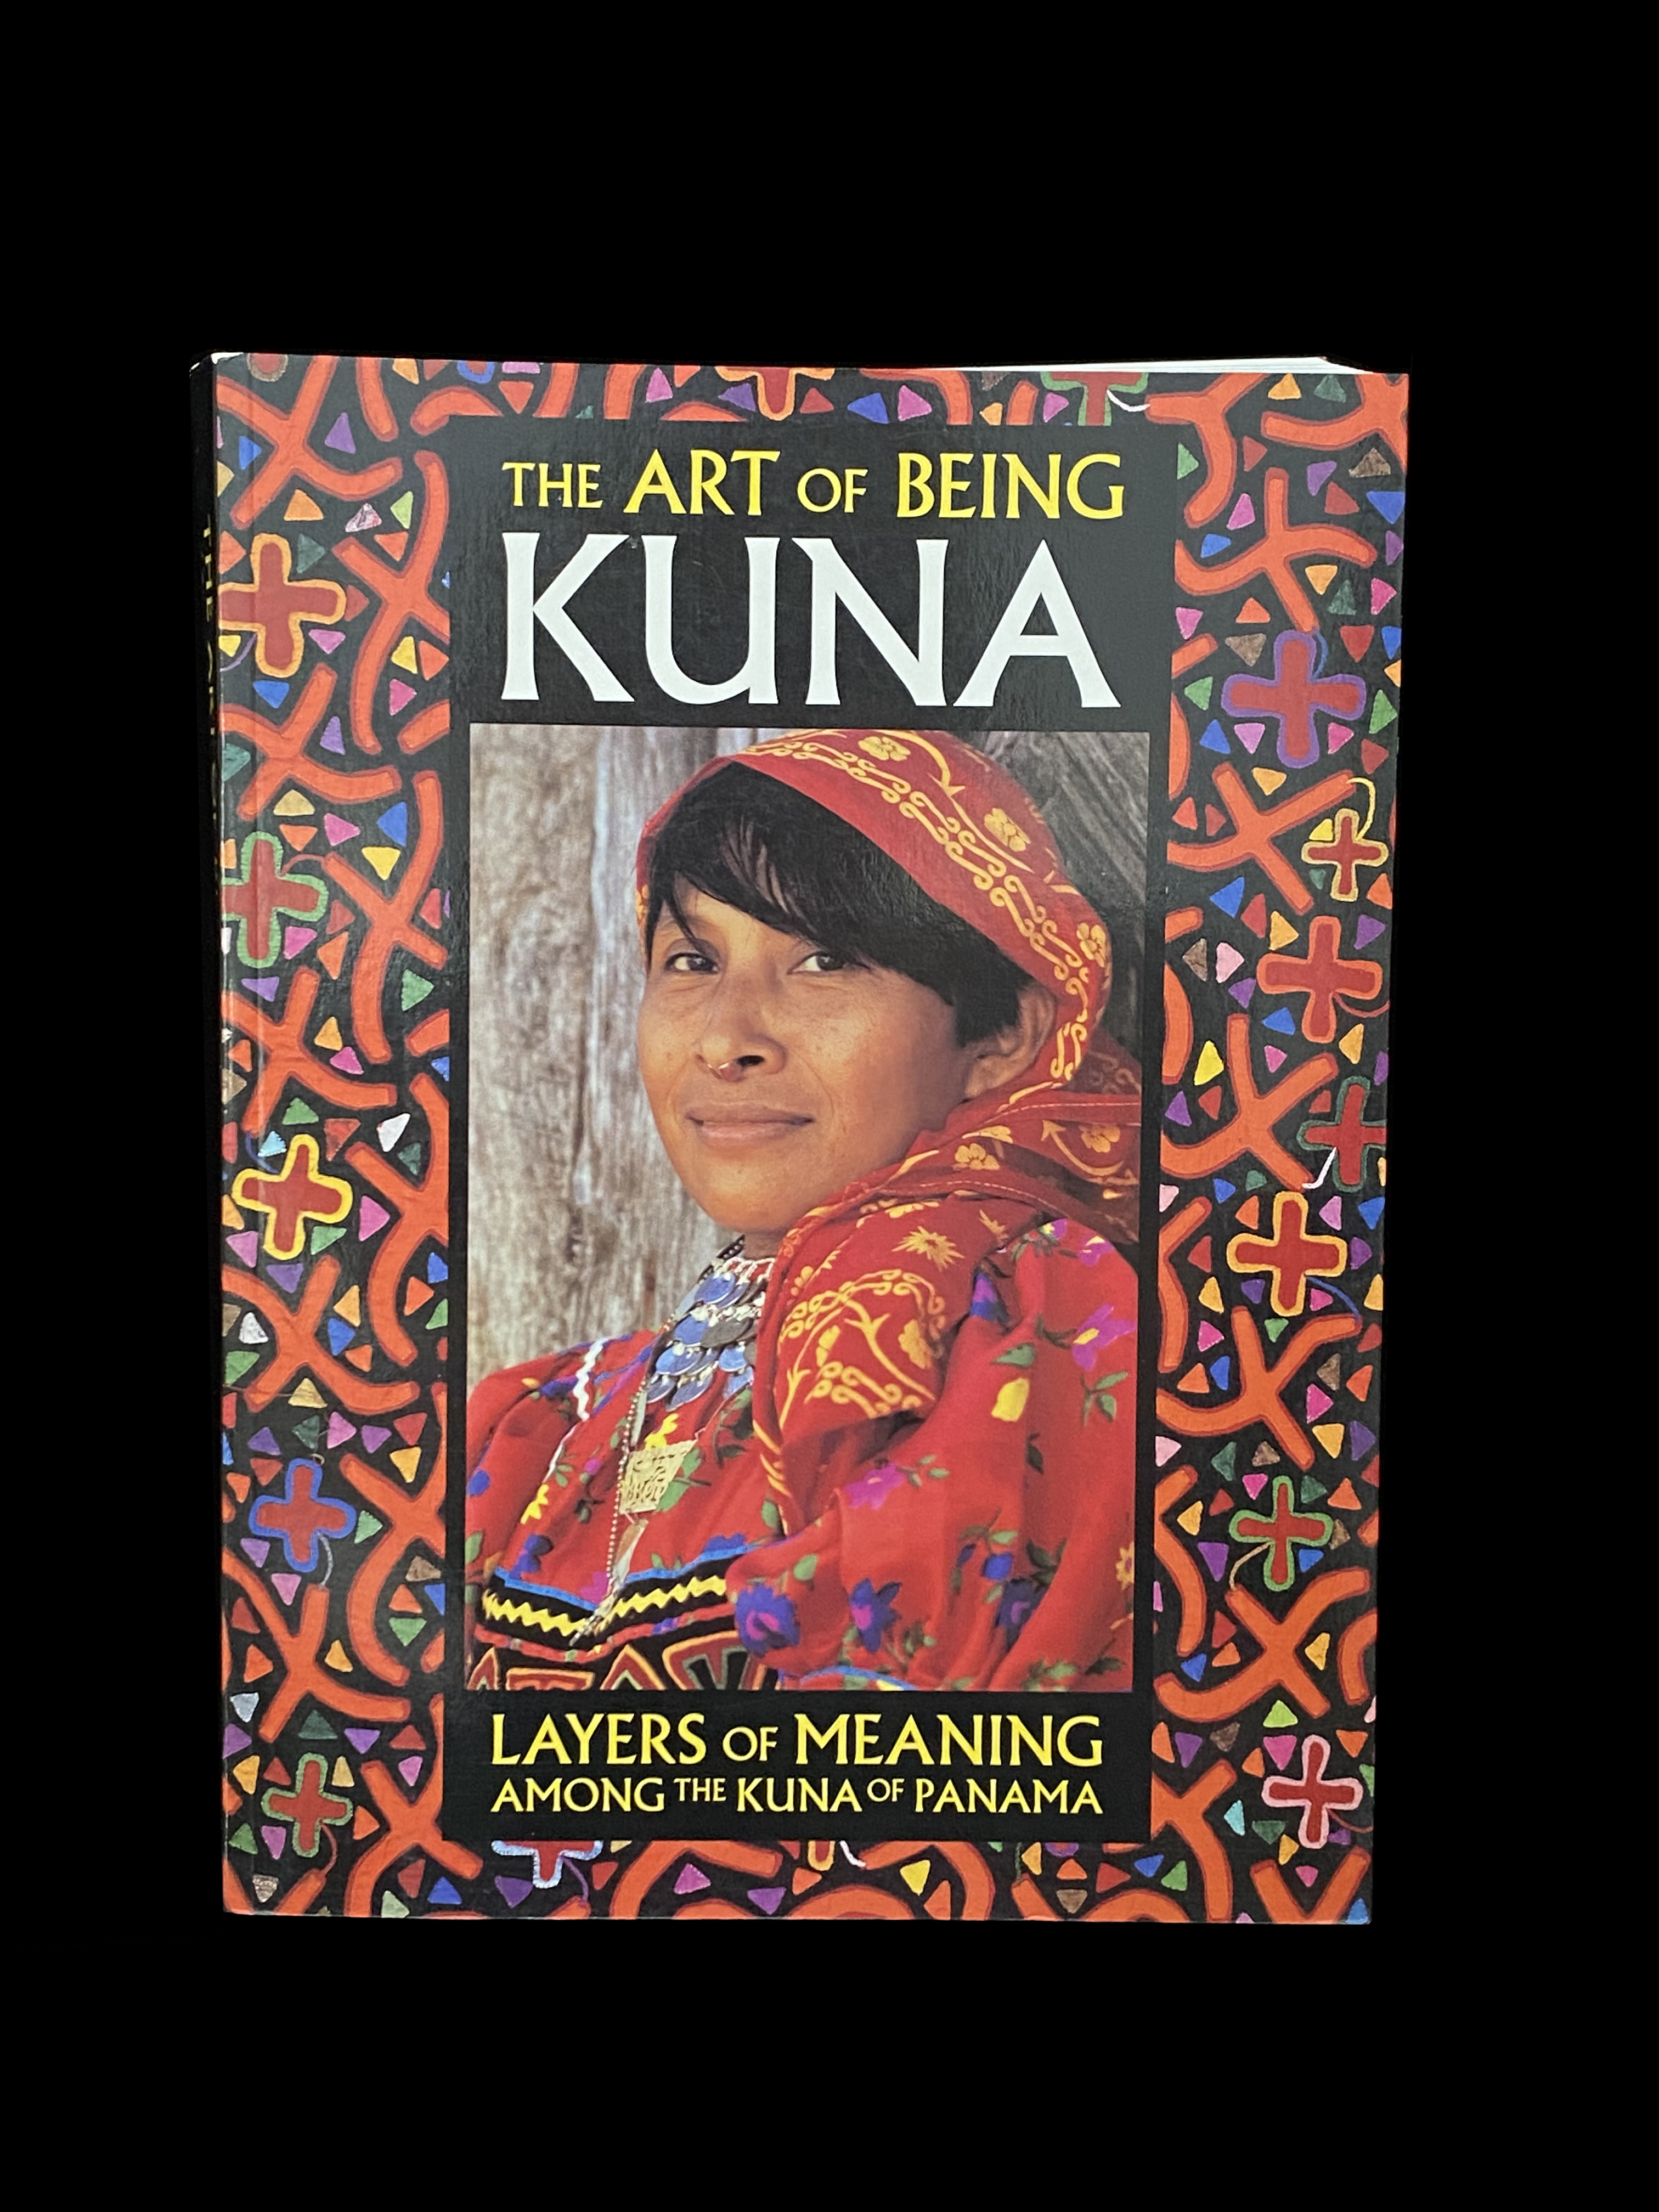 The Art of Being Kuna - Layers of Meaning Among the Kuna of Panama by Mari Lyn Salvador 